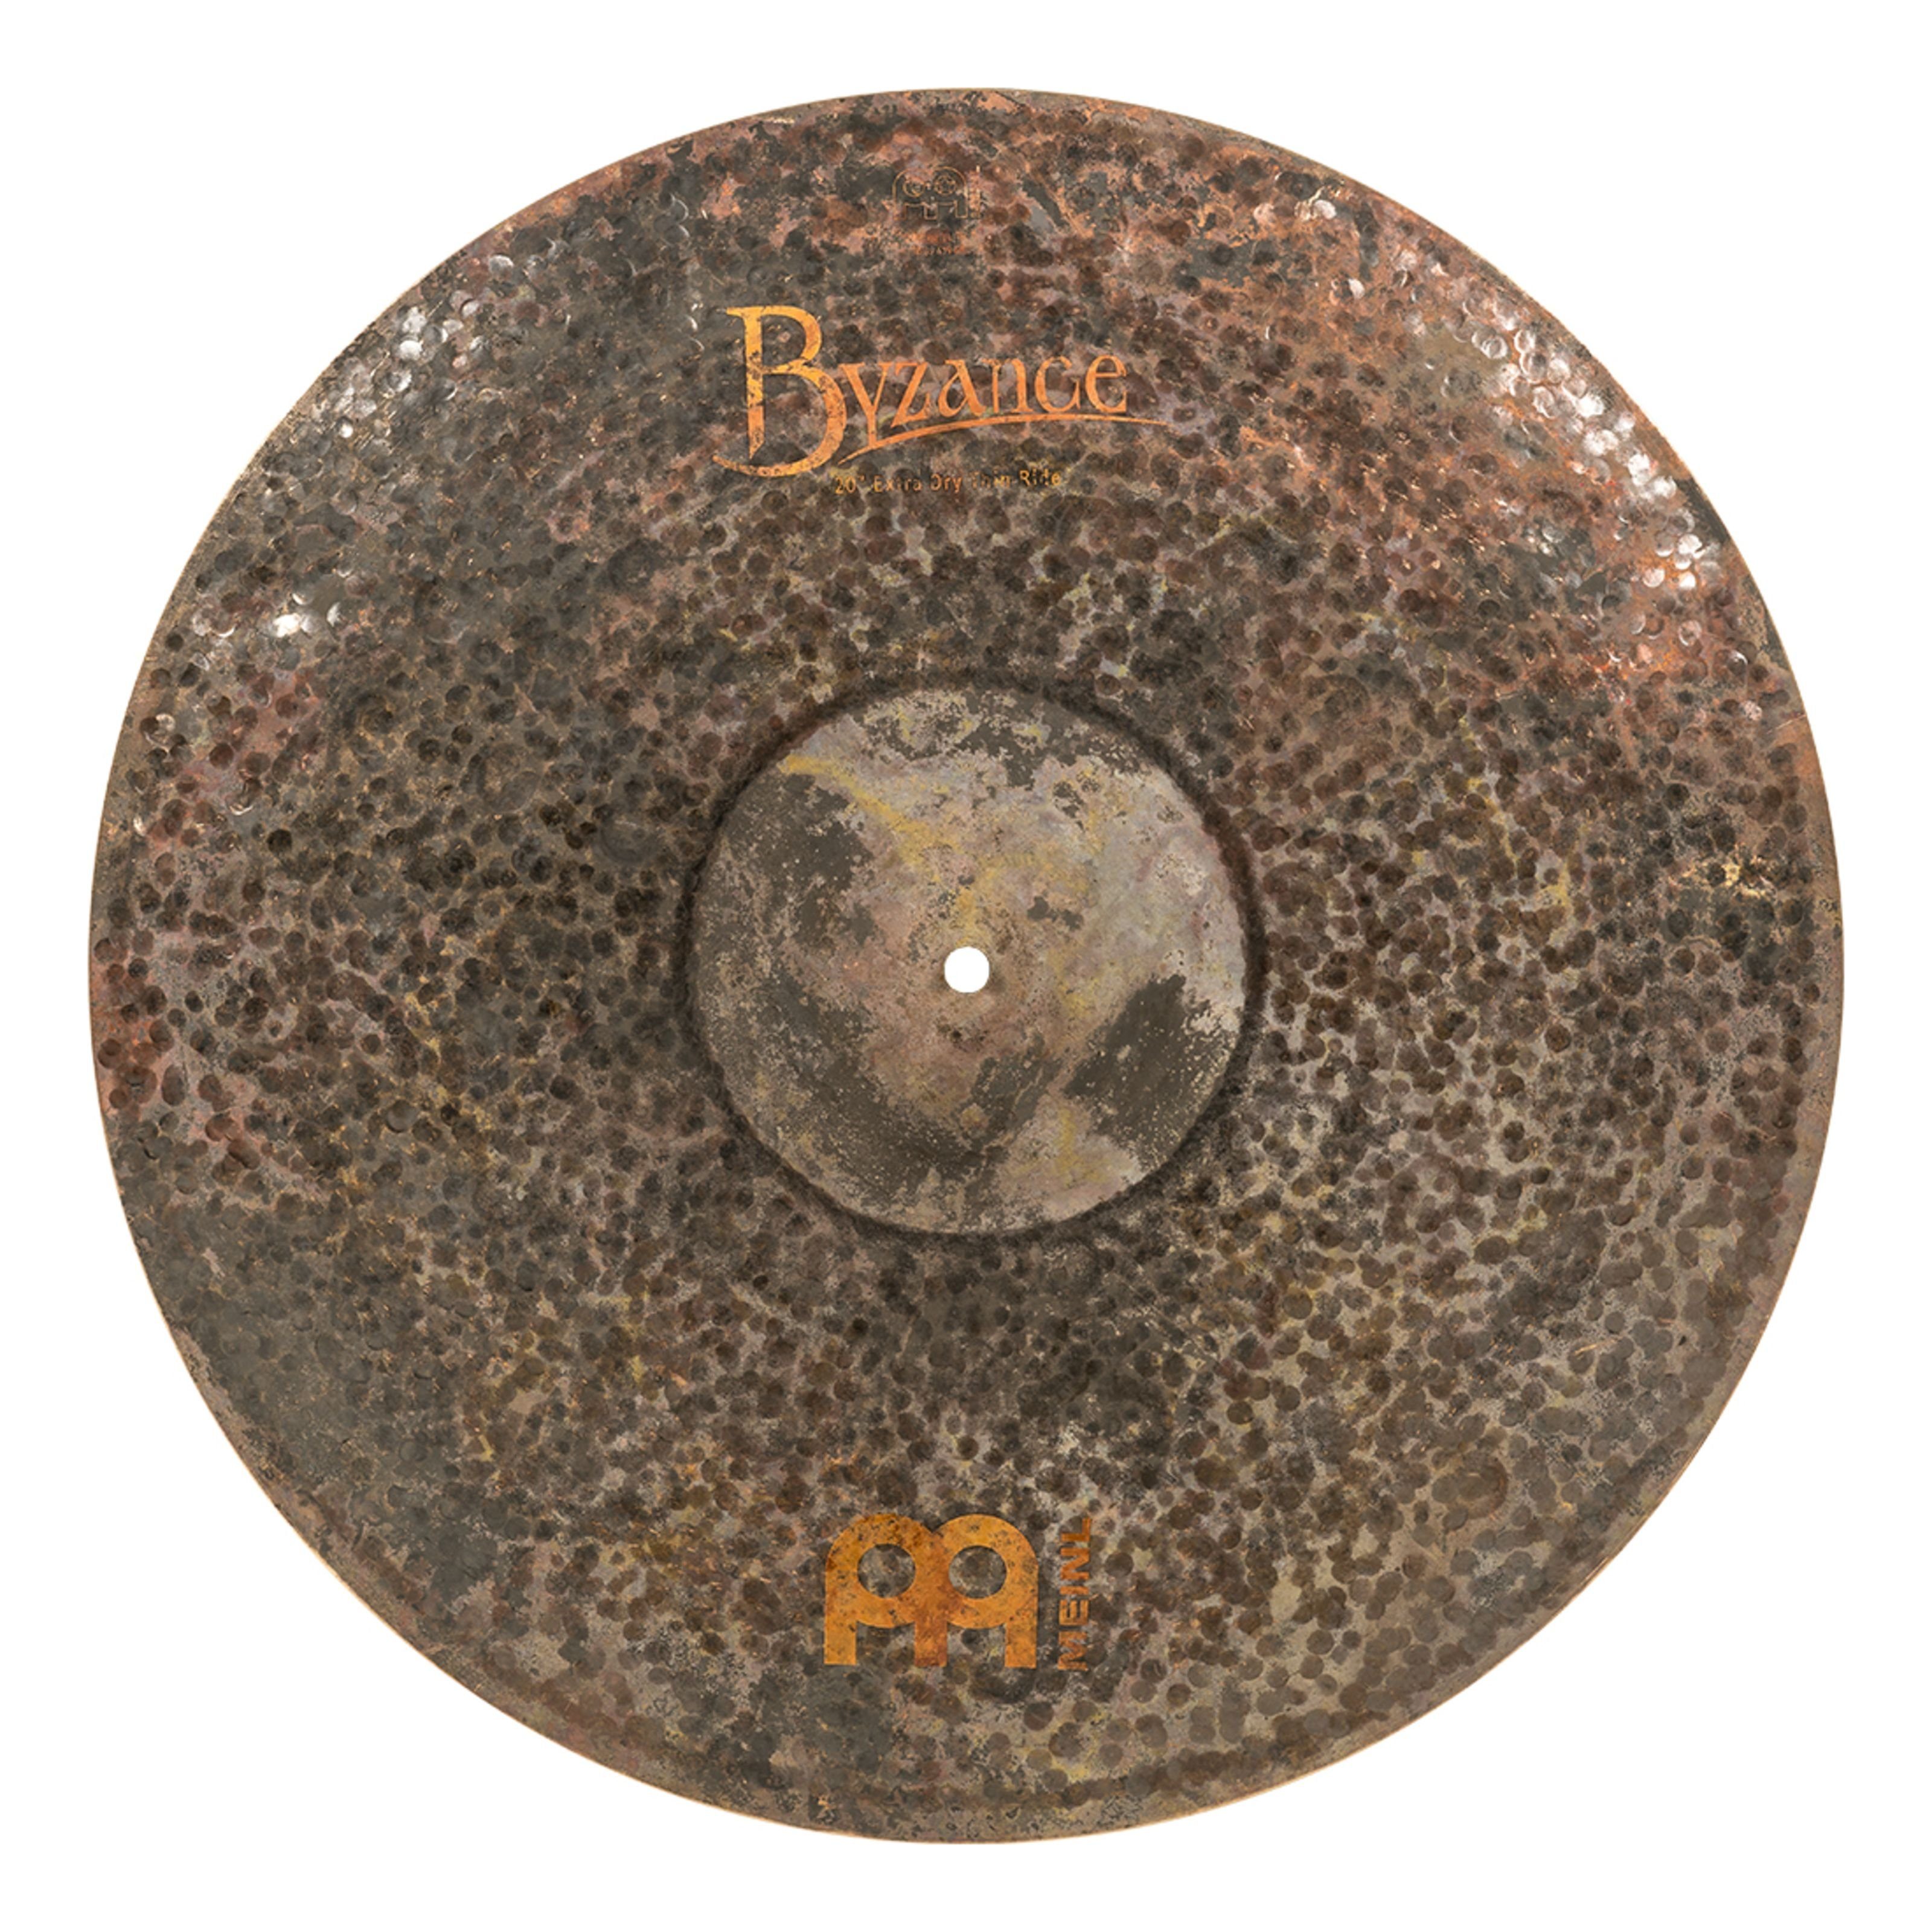 Meinl Percussion Spielzeug-Musikinstrument, Dry Ride Extra Byzance - Cymbal Ride 20", Thin B20EDTR